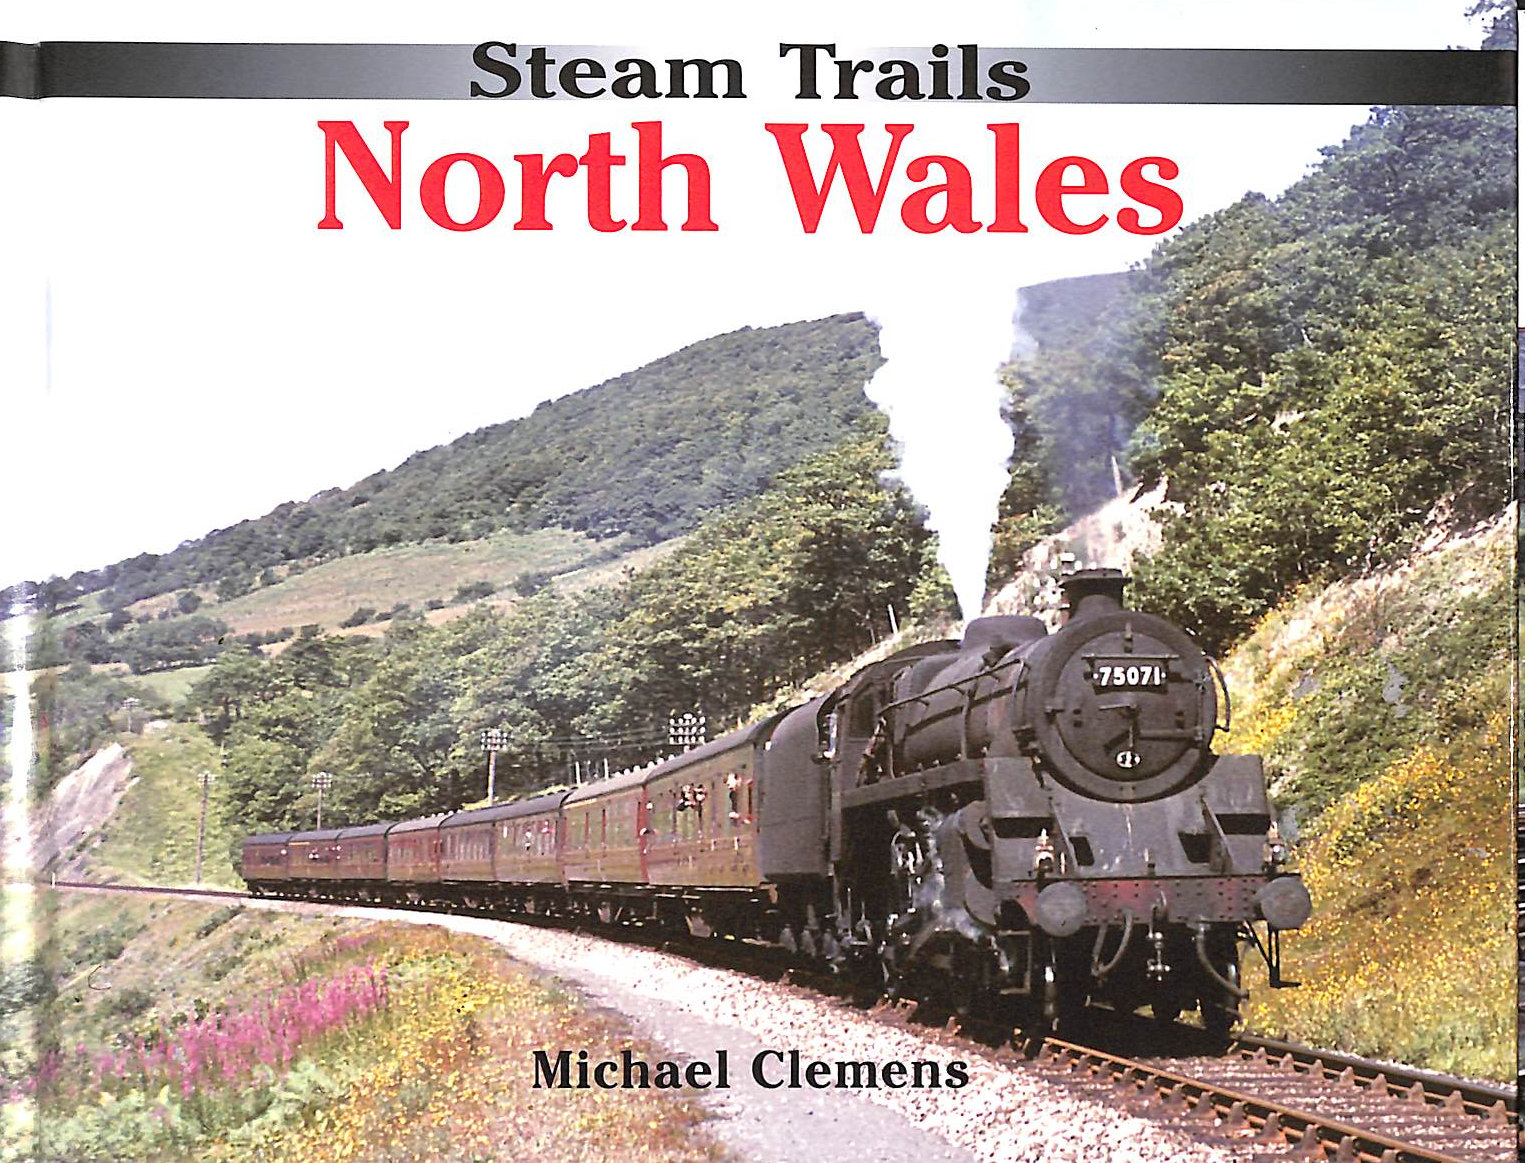 MICHAEL CLEMENS - North Wales (Steam Trails)